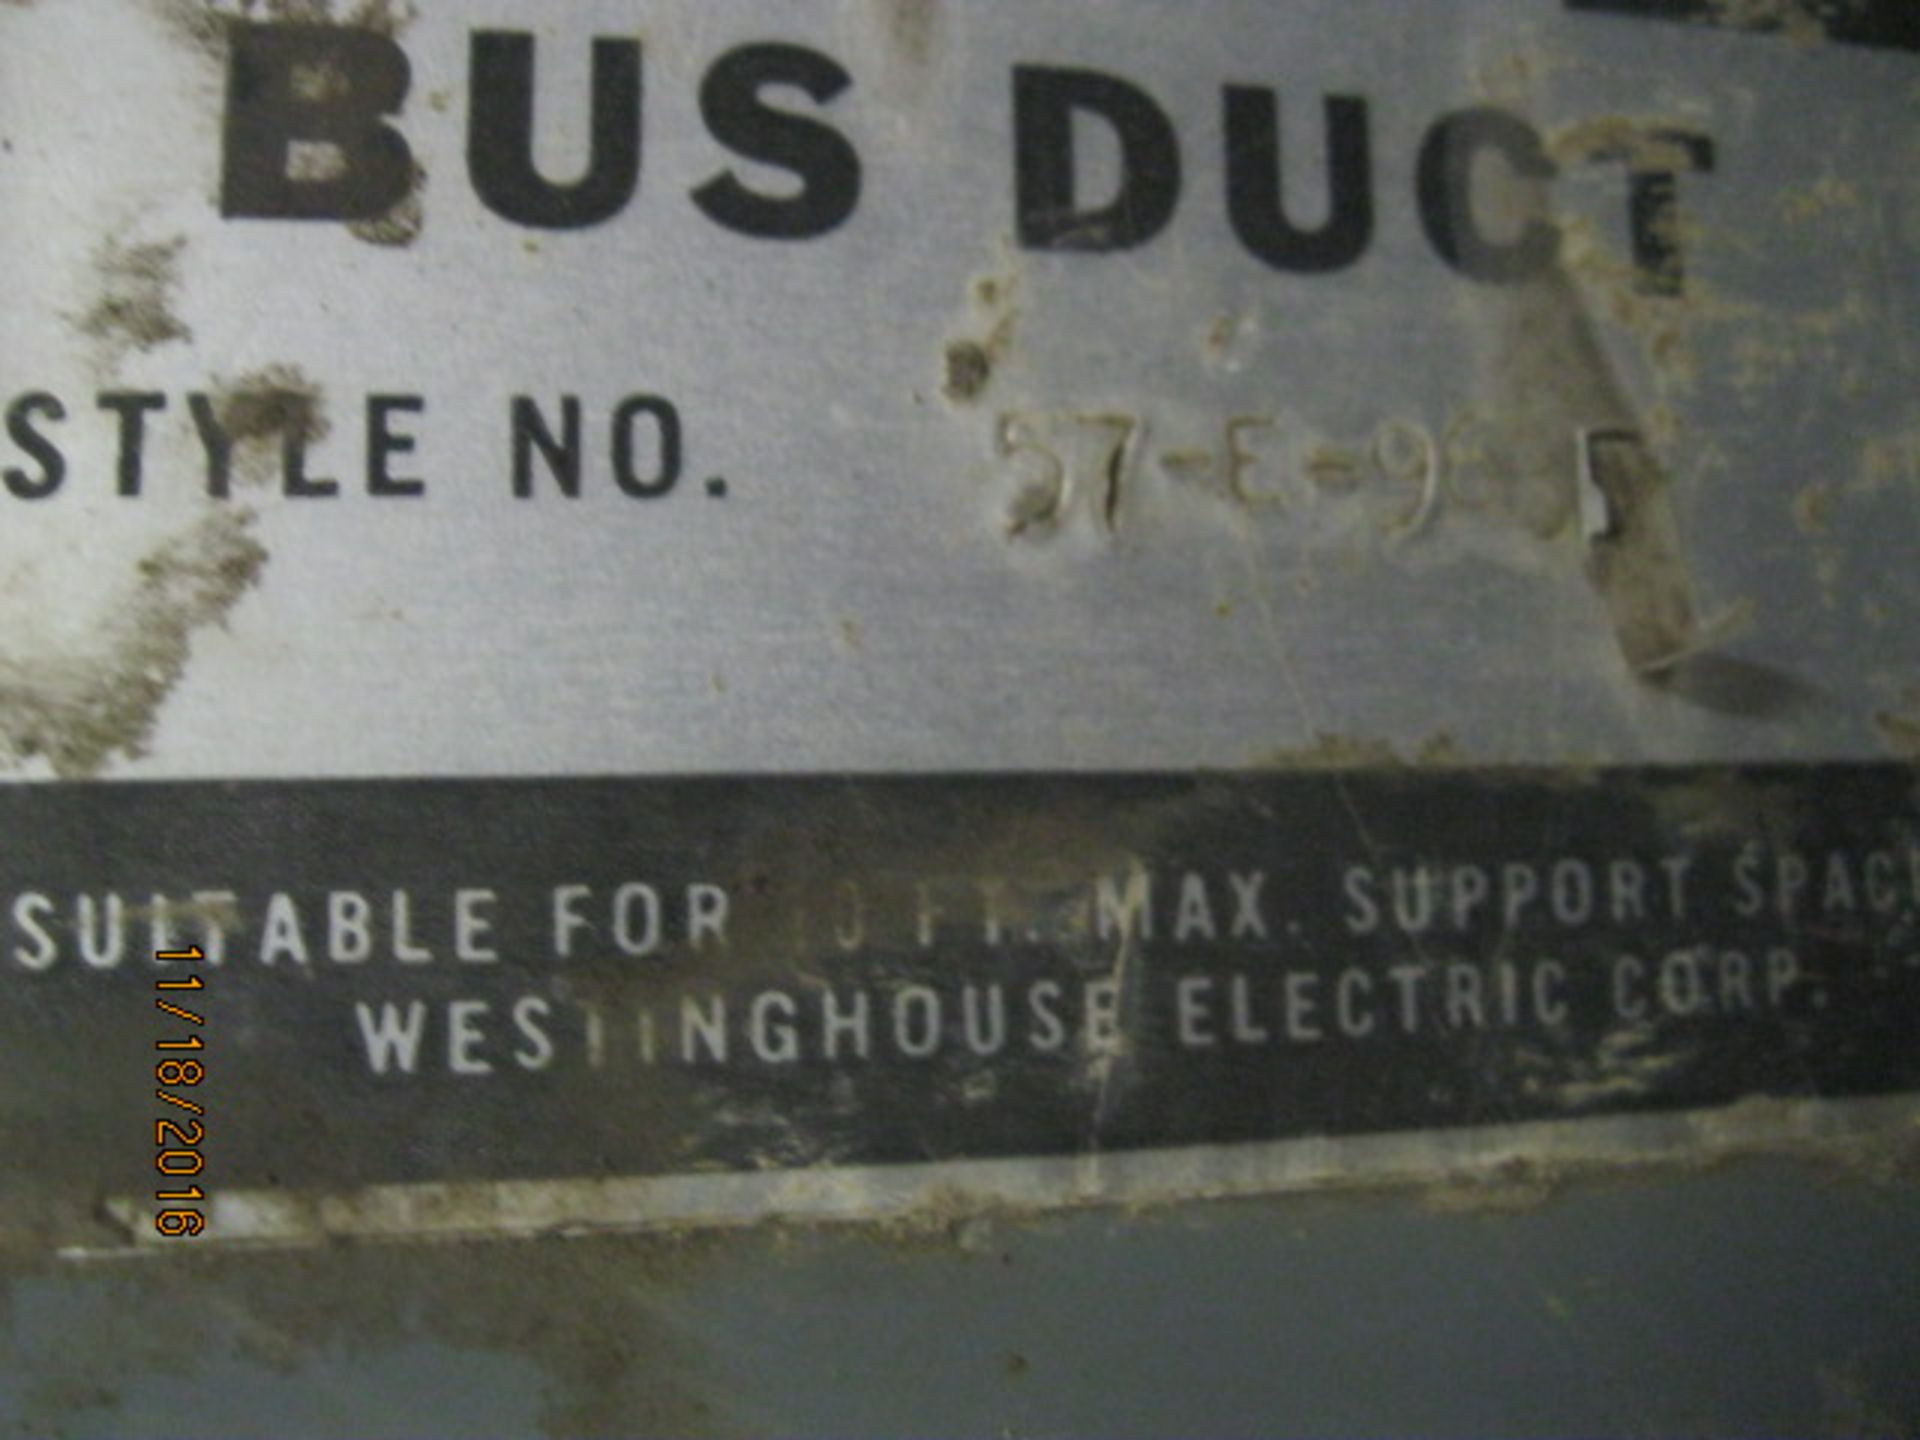 Westinghouse bus duct switch - Image 3 of 4